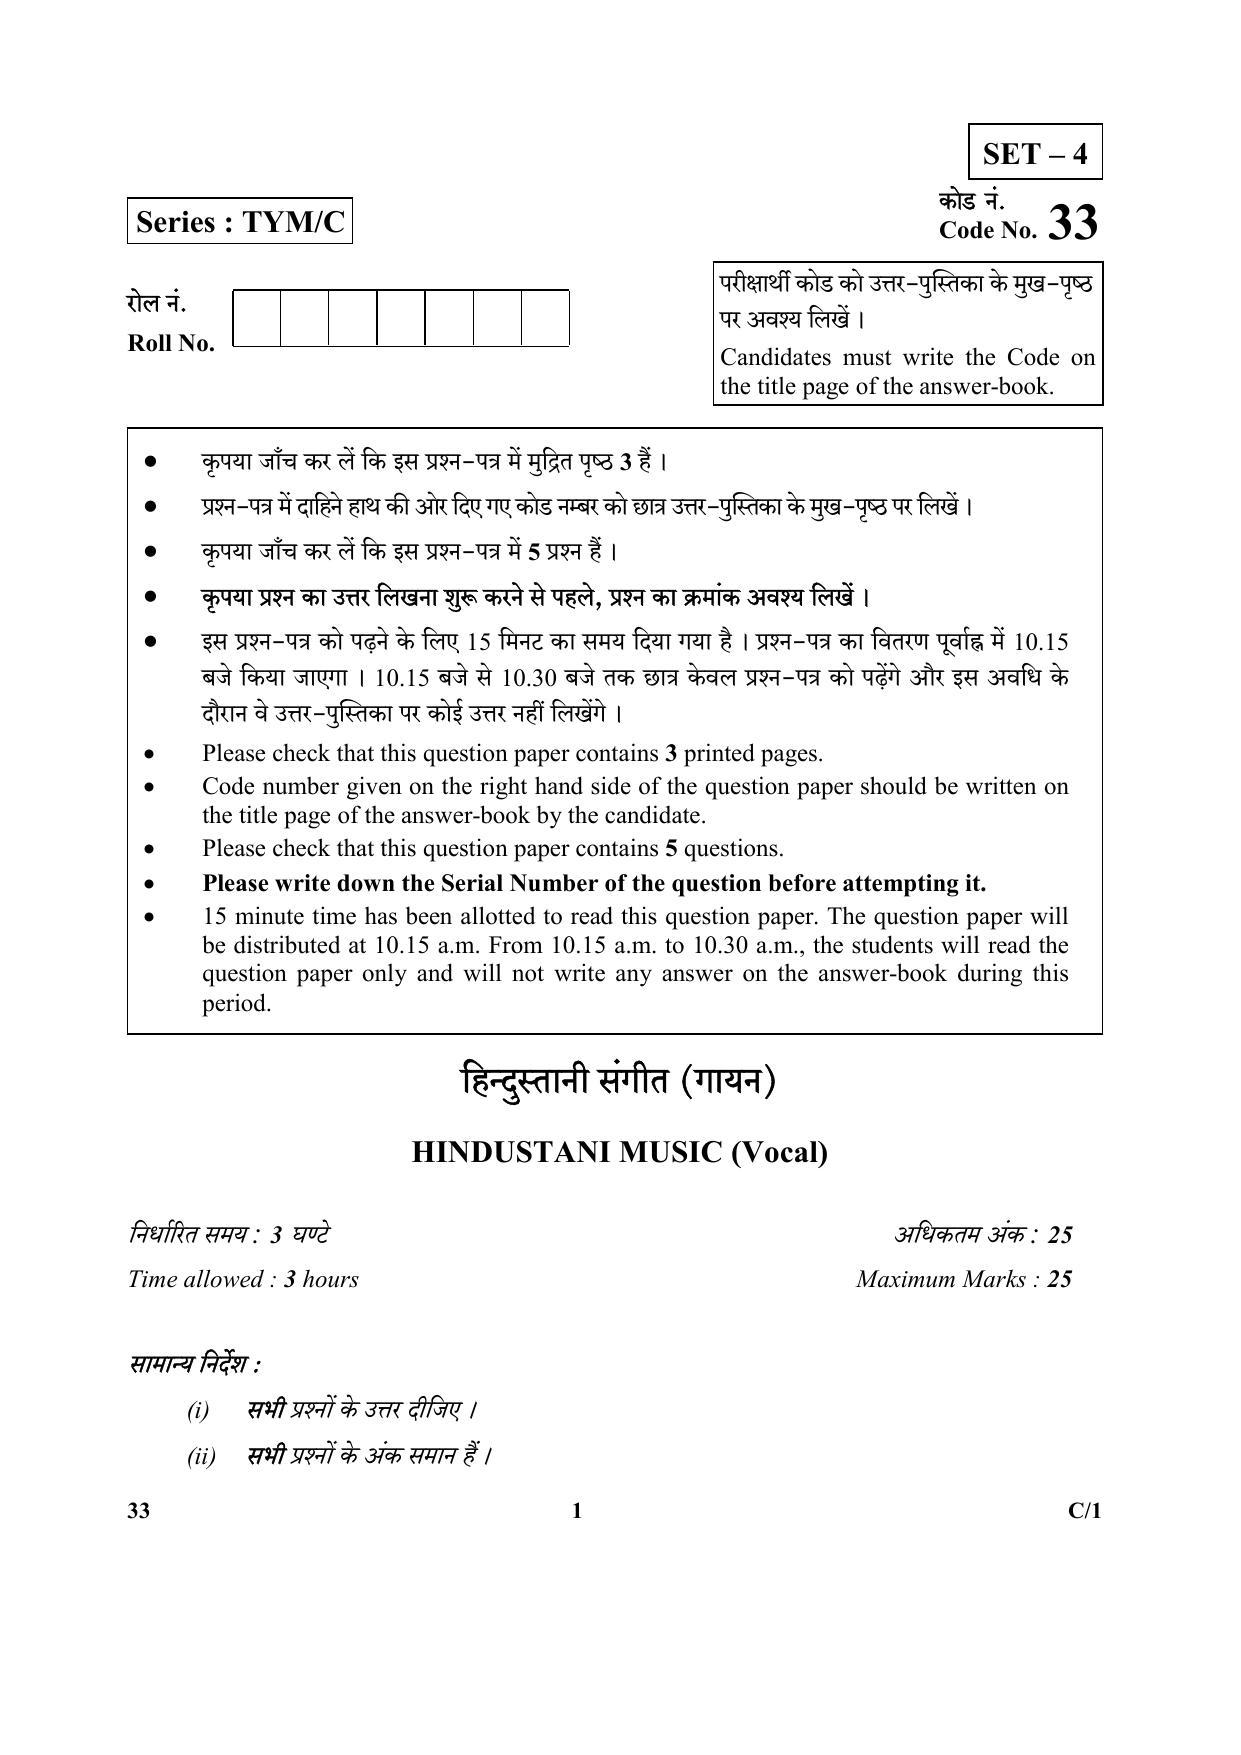 CBSE Class 10 33 (Hindustani Music)_Vocal 2018 Compartment Question Paper - Page 1